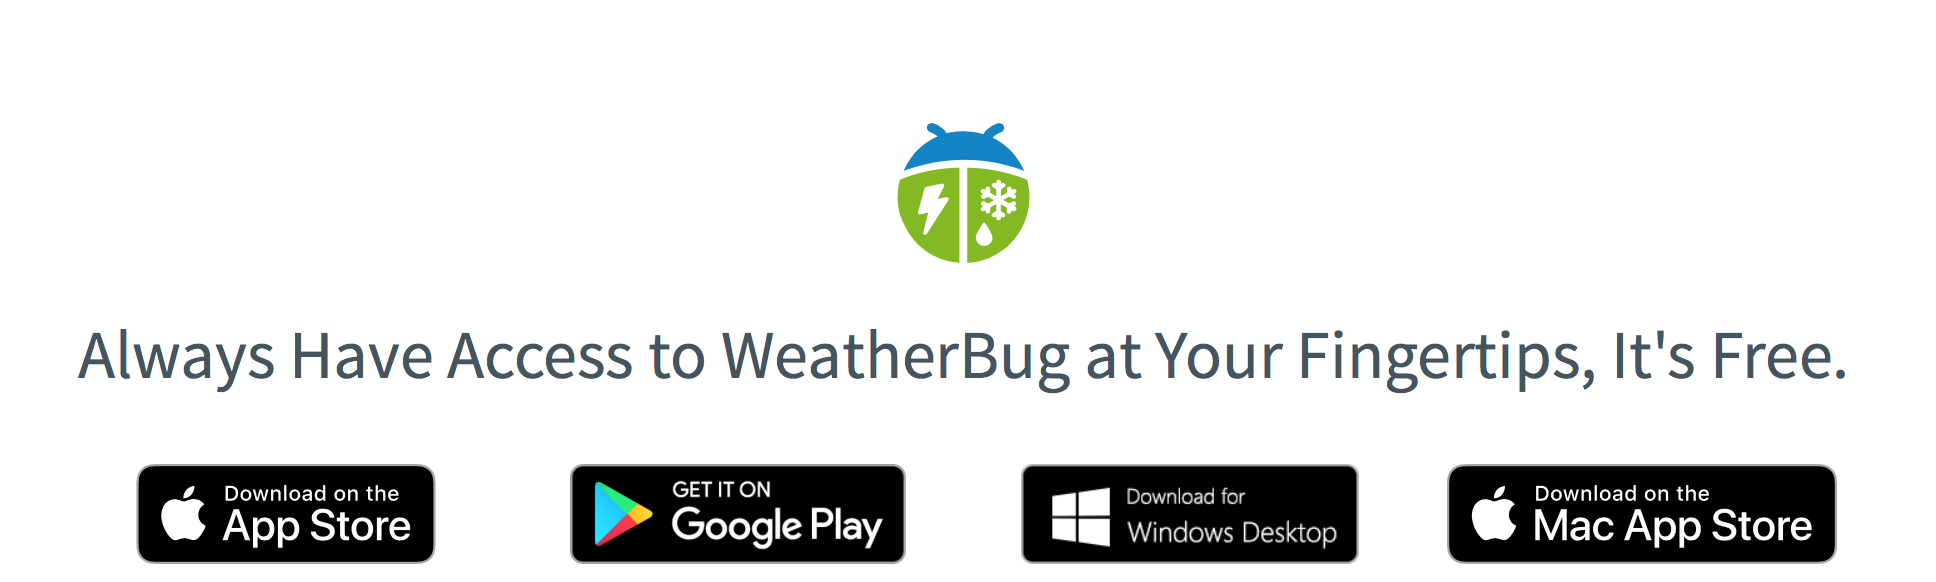 screen grab of the weather bug logo